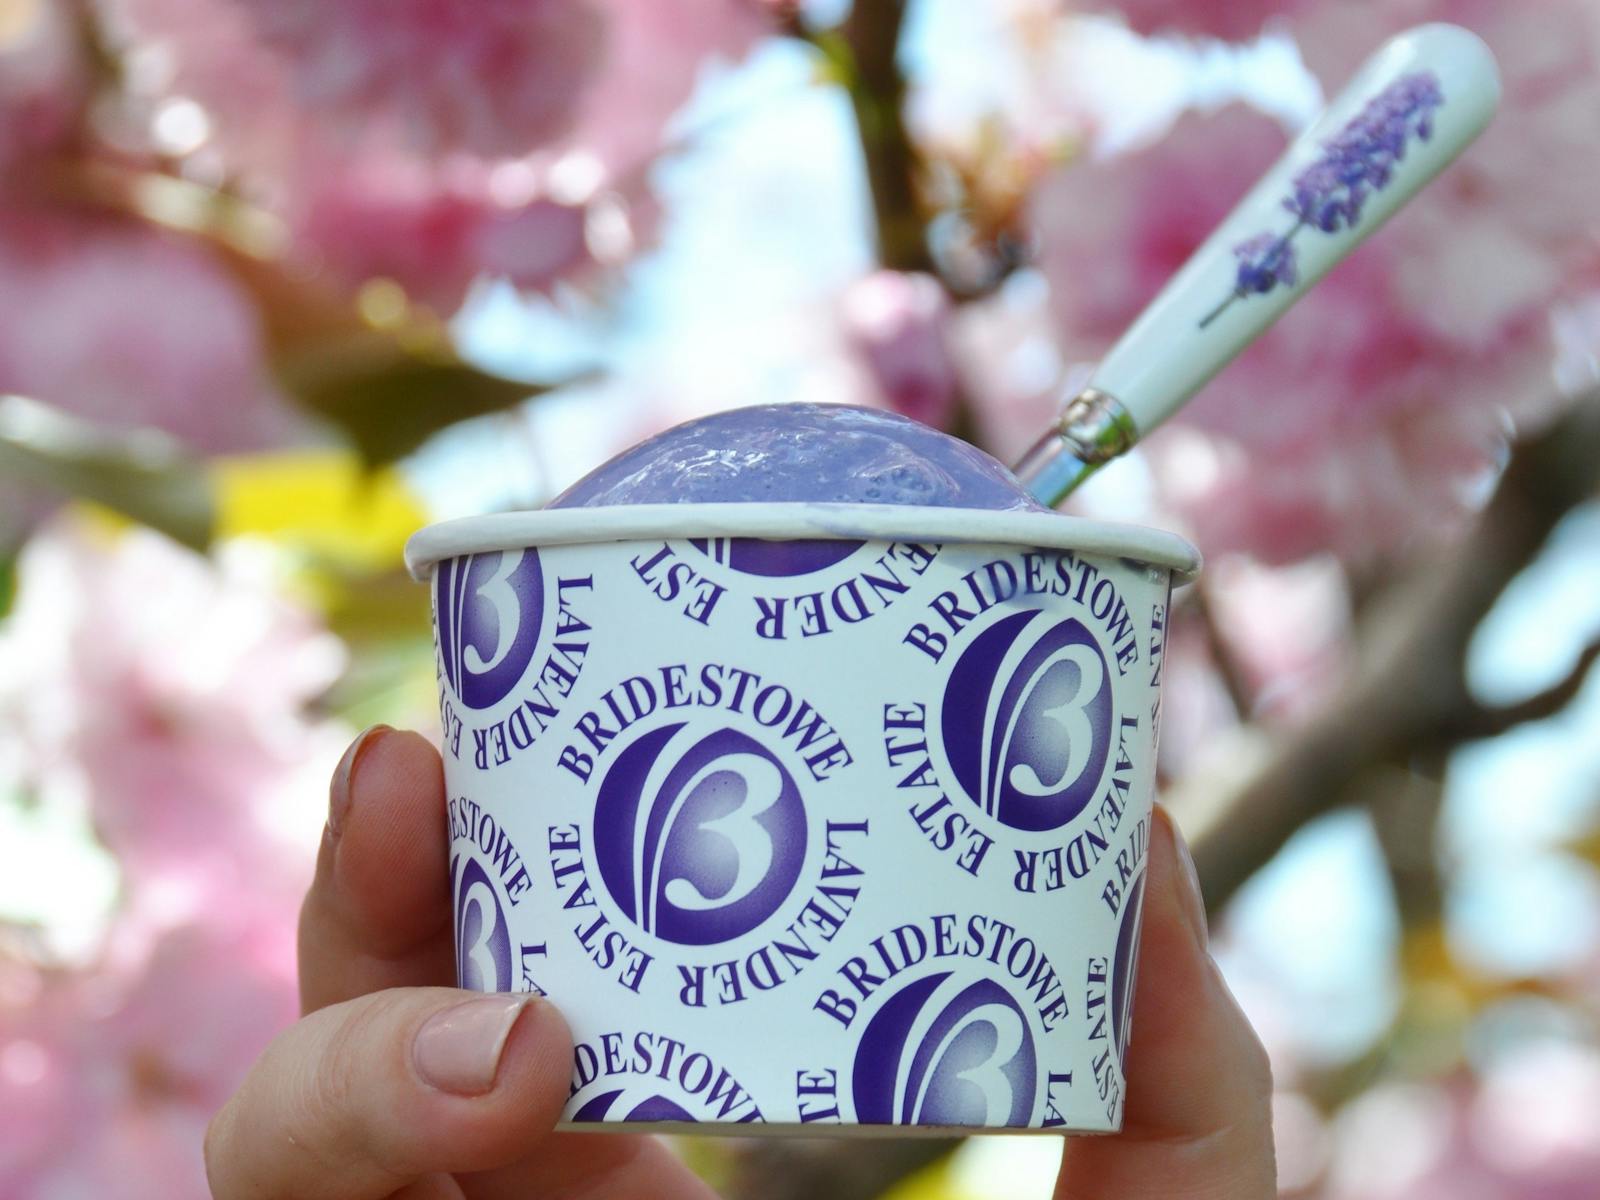 Lavender ice cream in front of the cherry blossoms at Bridestowe Estate in the spring time.